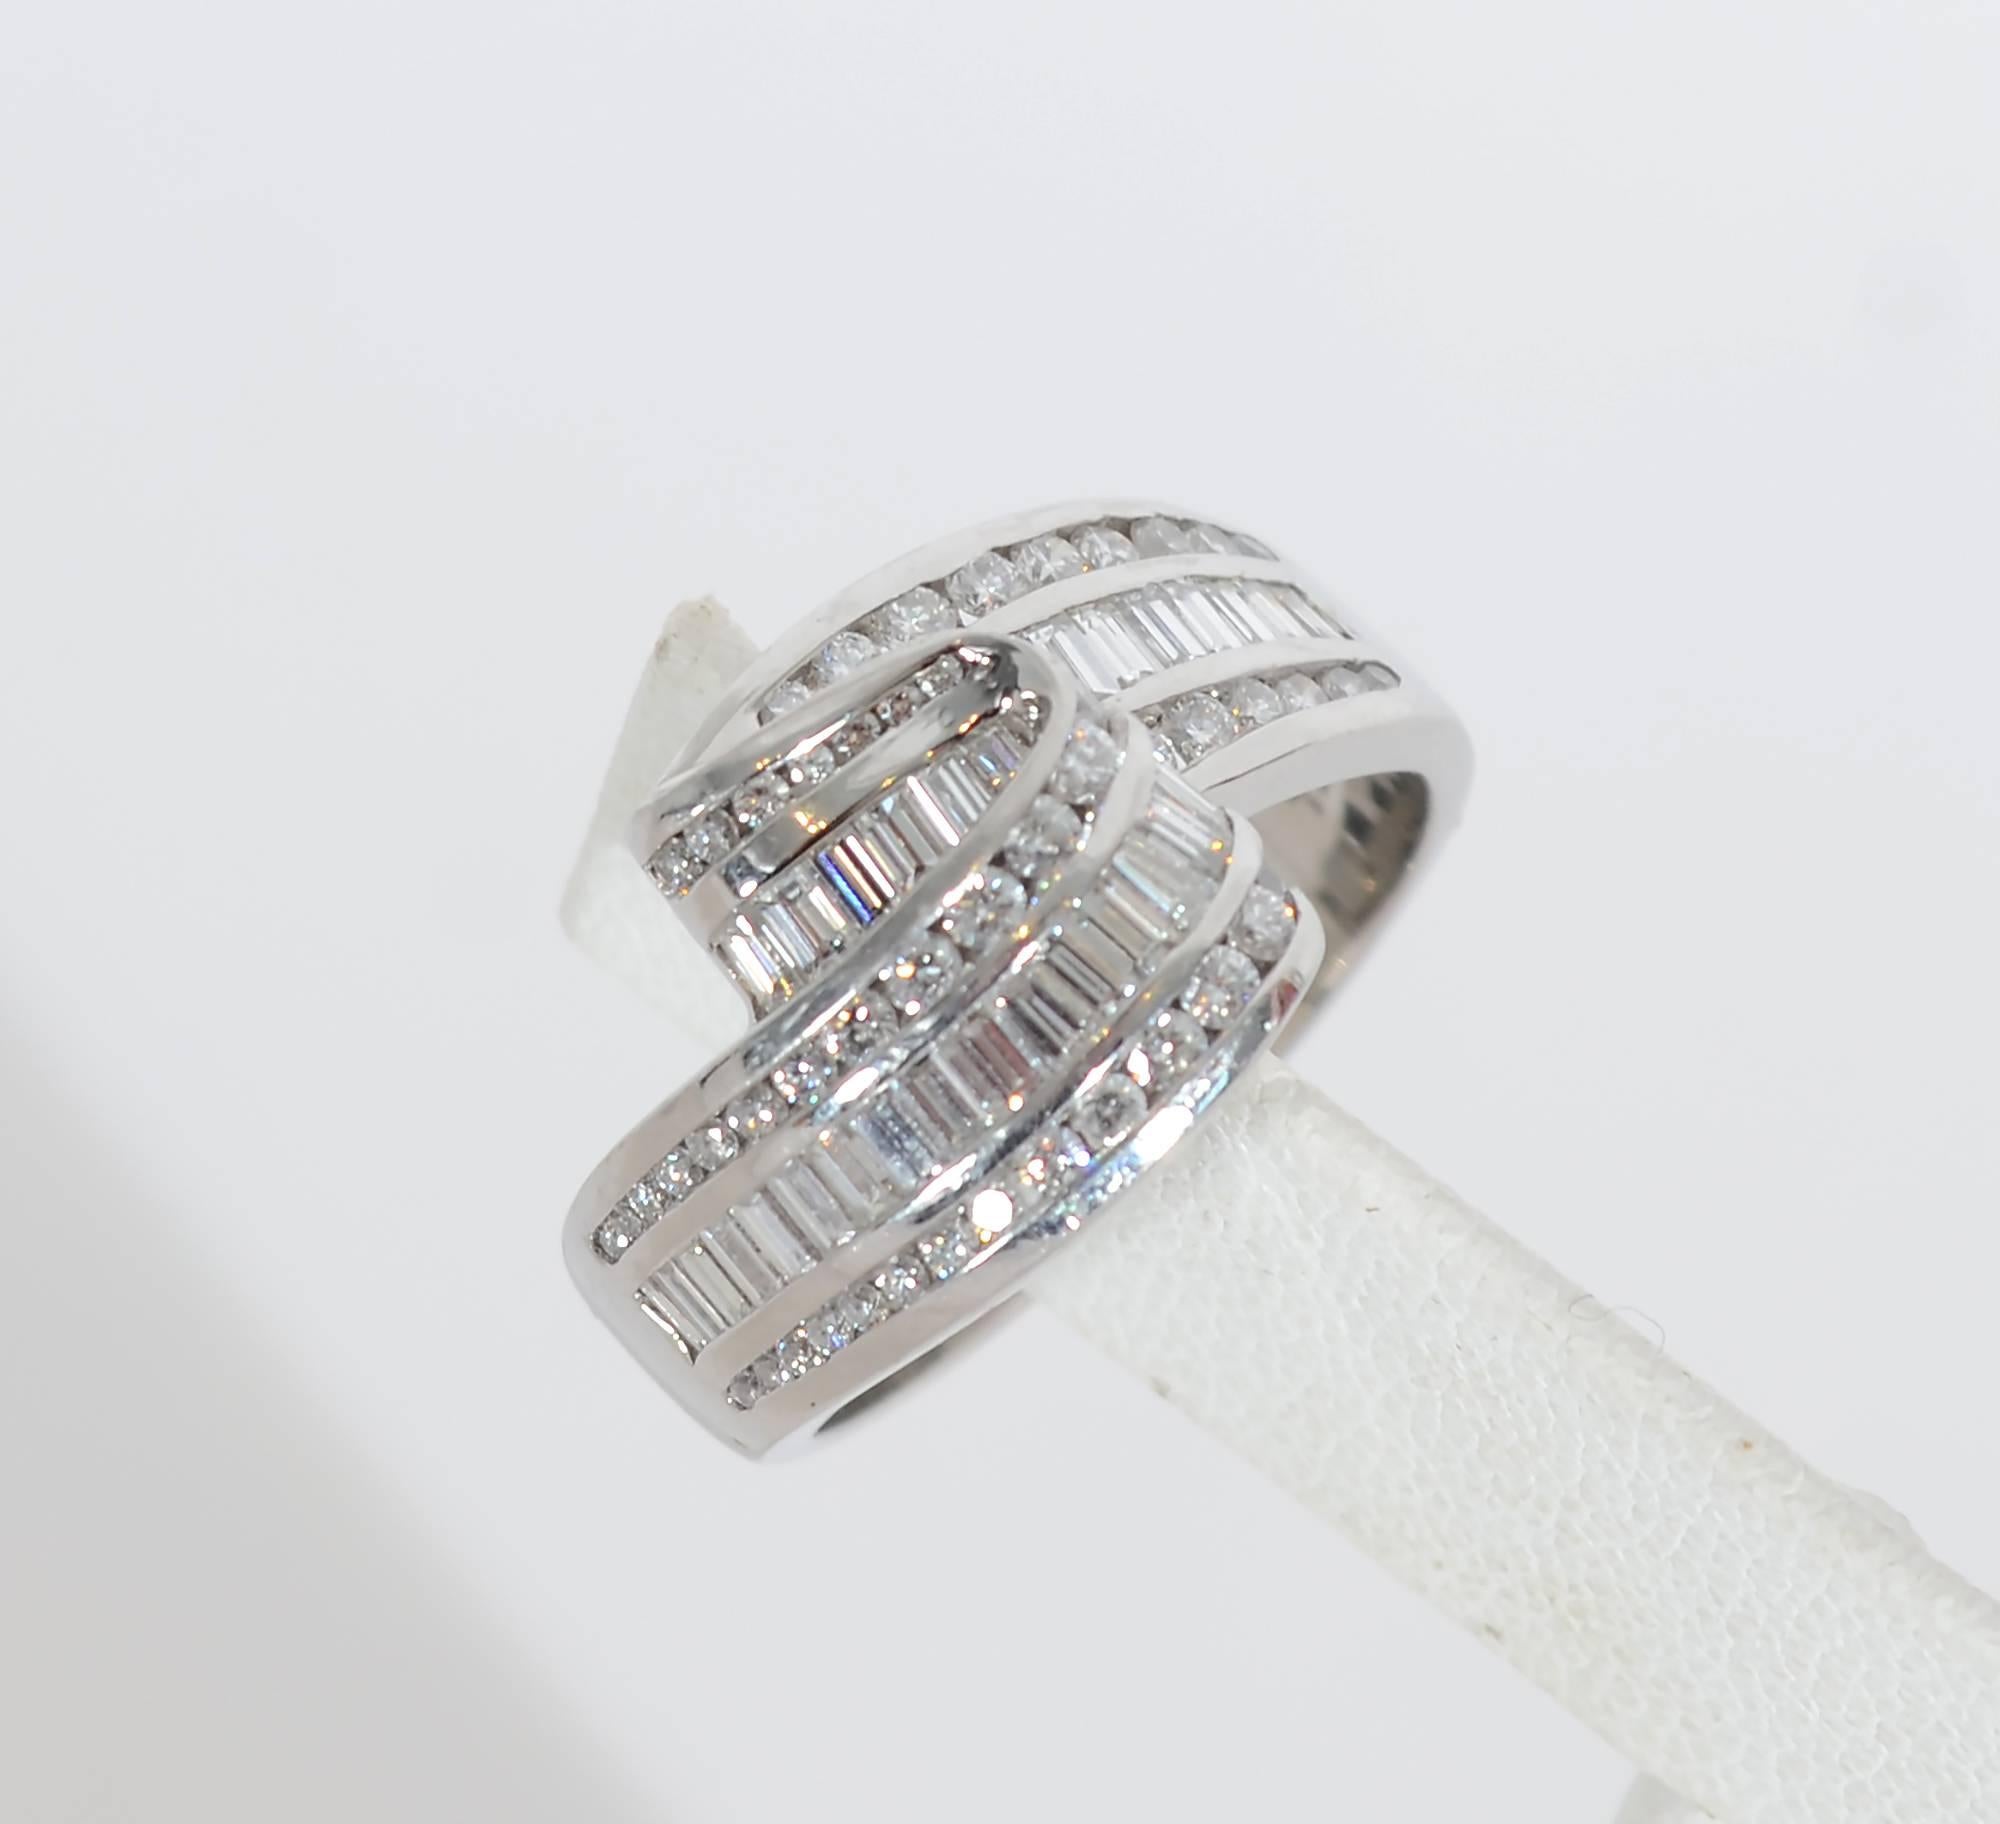 Stunning platinum and diamond ring by legendary American jewelry designer, Charles Krypell. The ring has the graceful appearance of undulating ribbon. It is made of 2.5 carats of VS quality round and rectangular diamonds. The ring is size 9 3/4. It